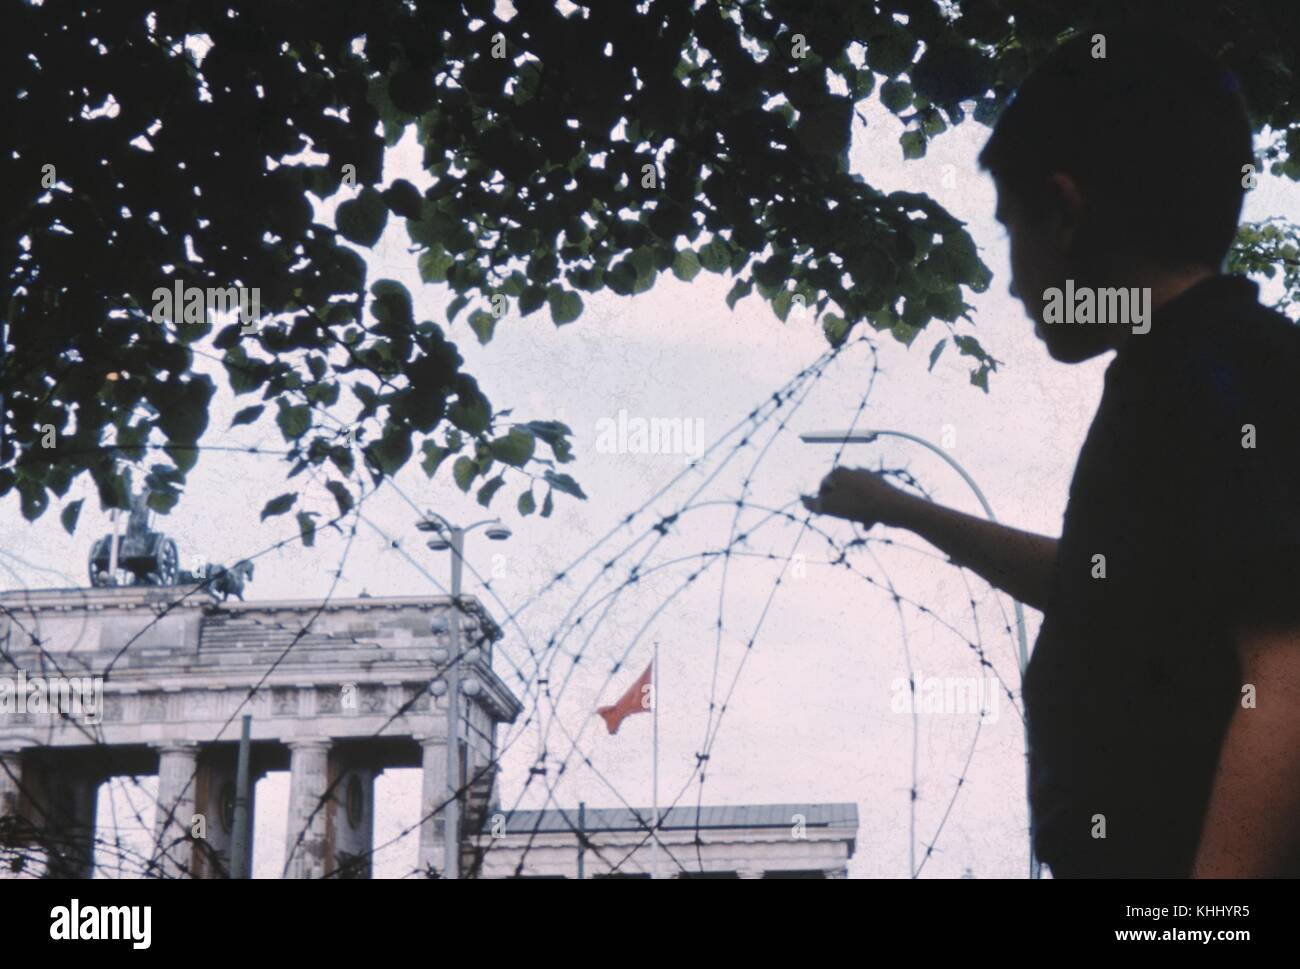 Child, seen in silhouette, reaching towards barbed wire marking the line between East Berlin and West Berlin, with buildings on the East Berlin side visible beyond the wire, Germany, 1961. Stock Photo